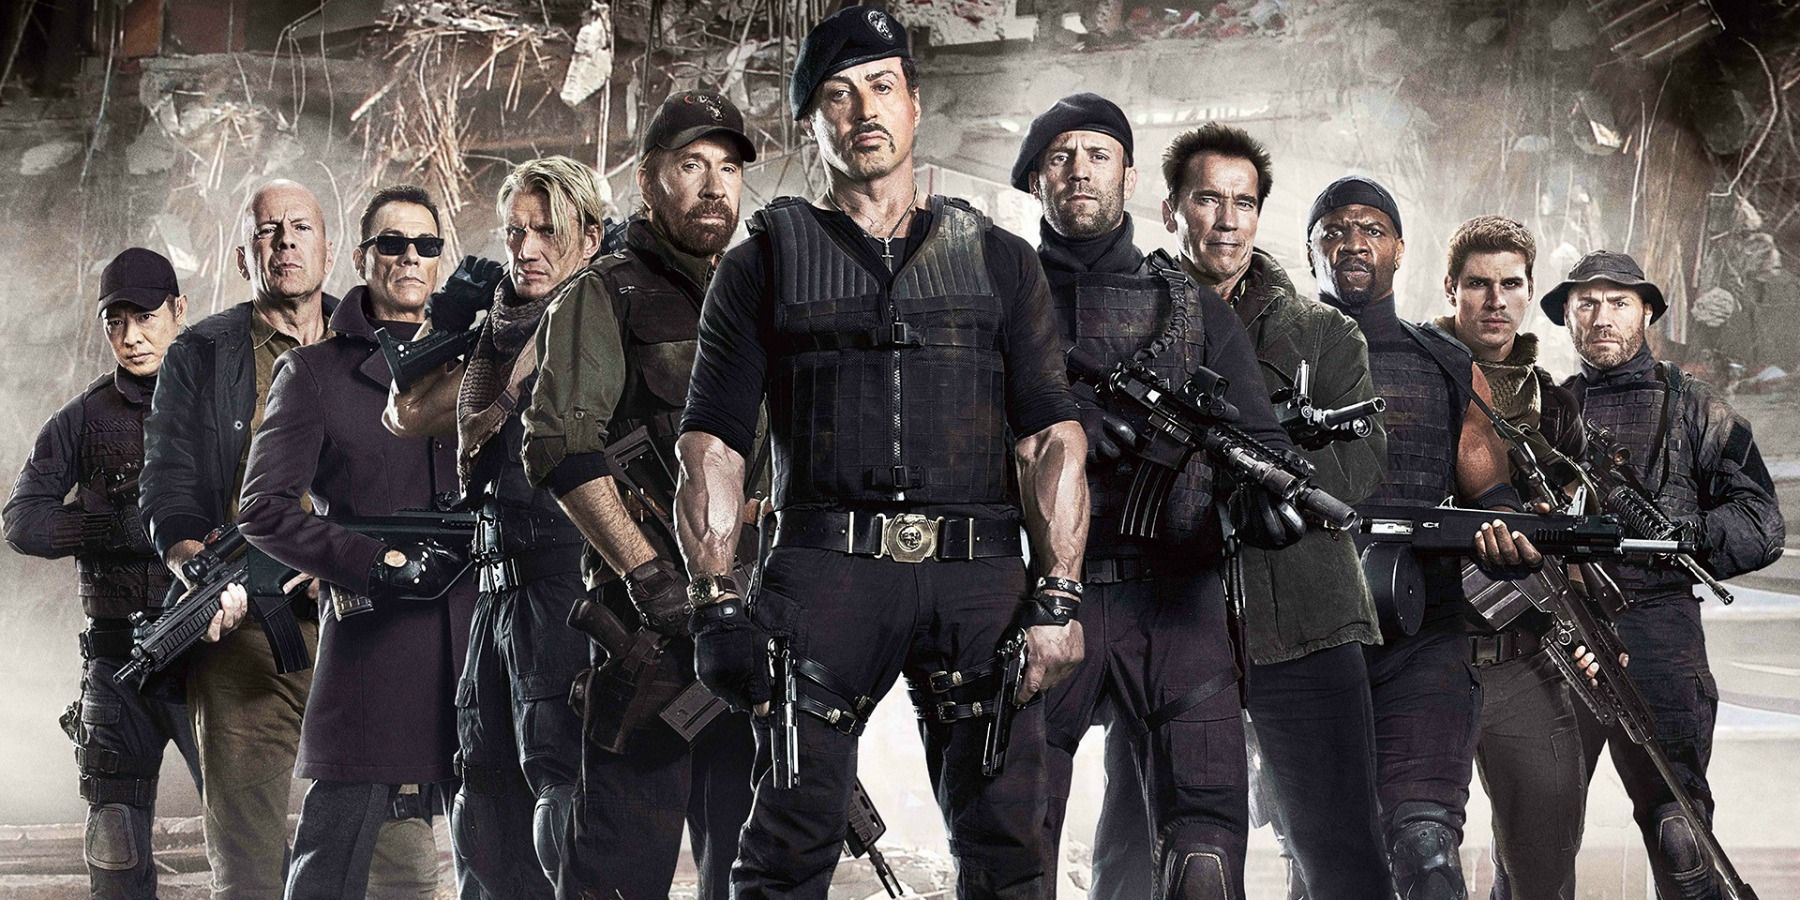 Arnold Schwarzenegger Won’t Do Expendables 4 Without Sly Stallone